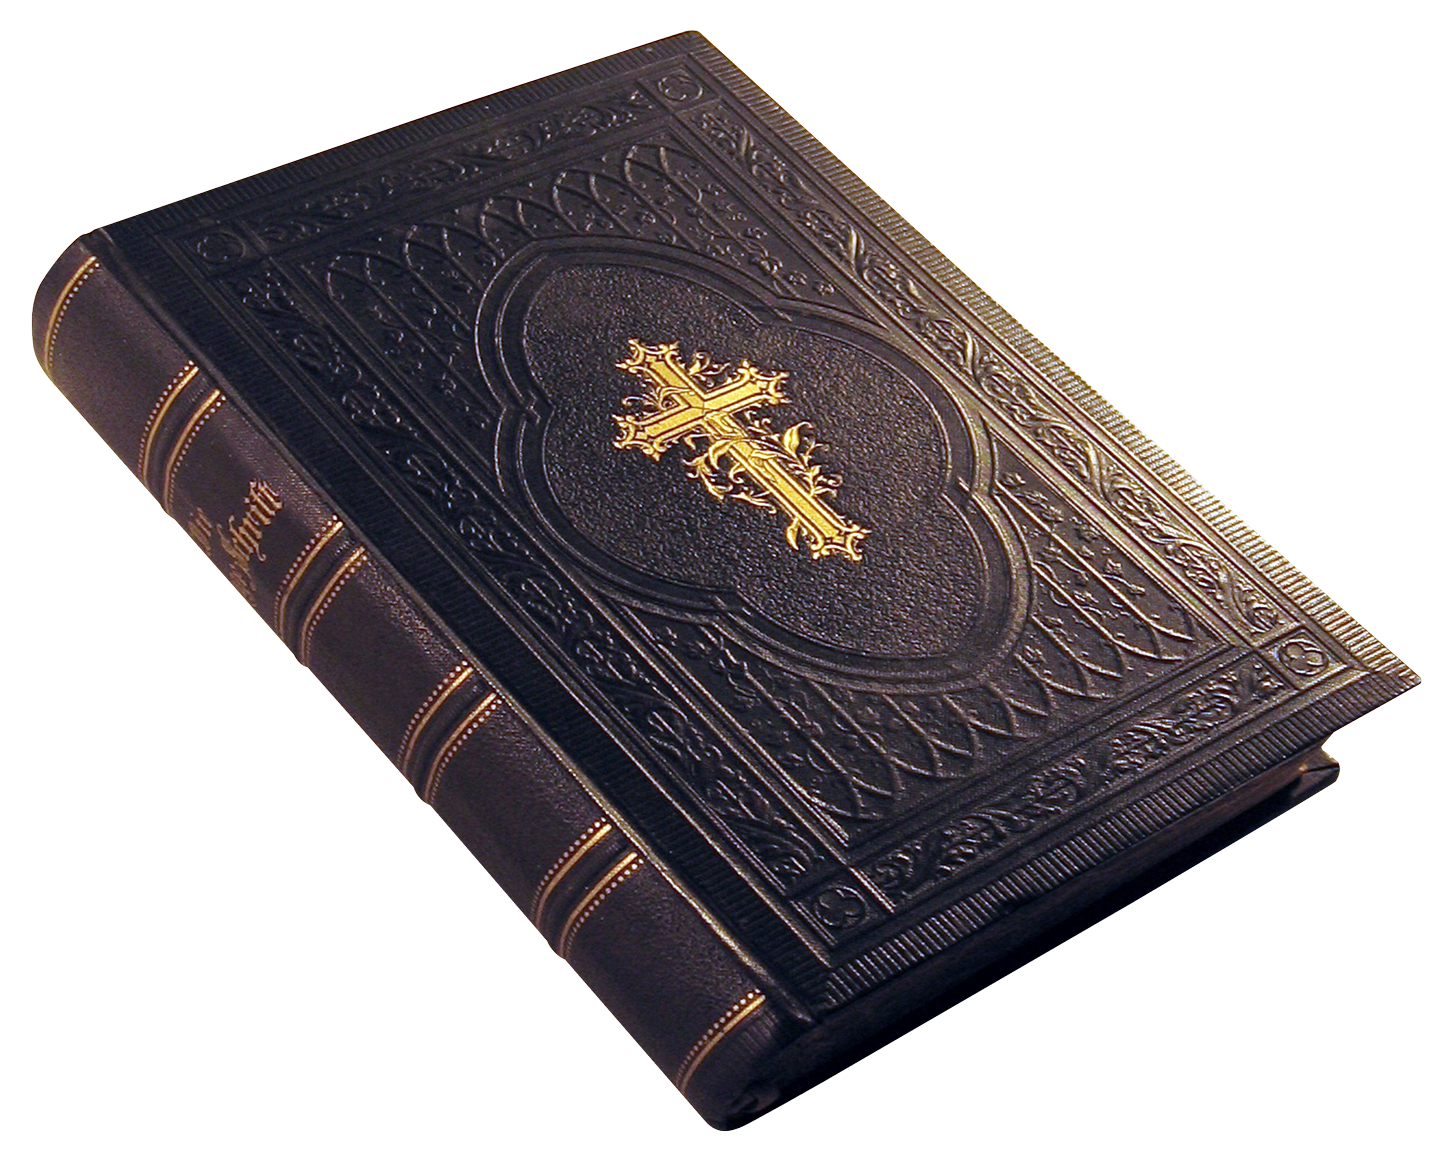 Bible With Elaborate Cover